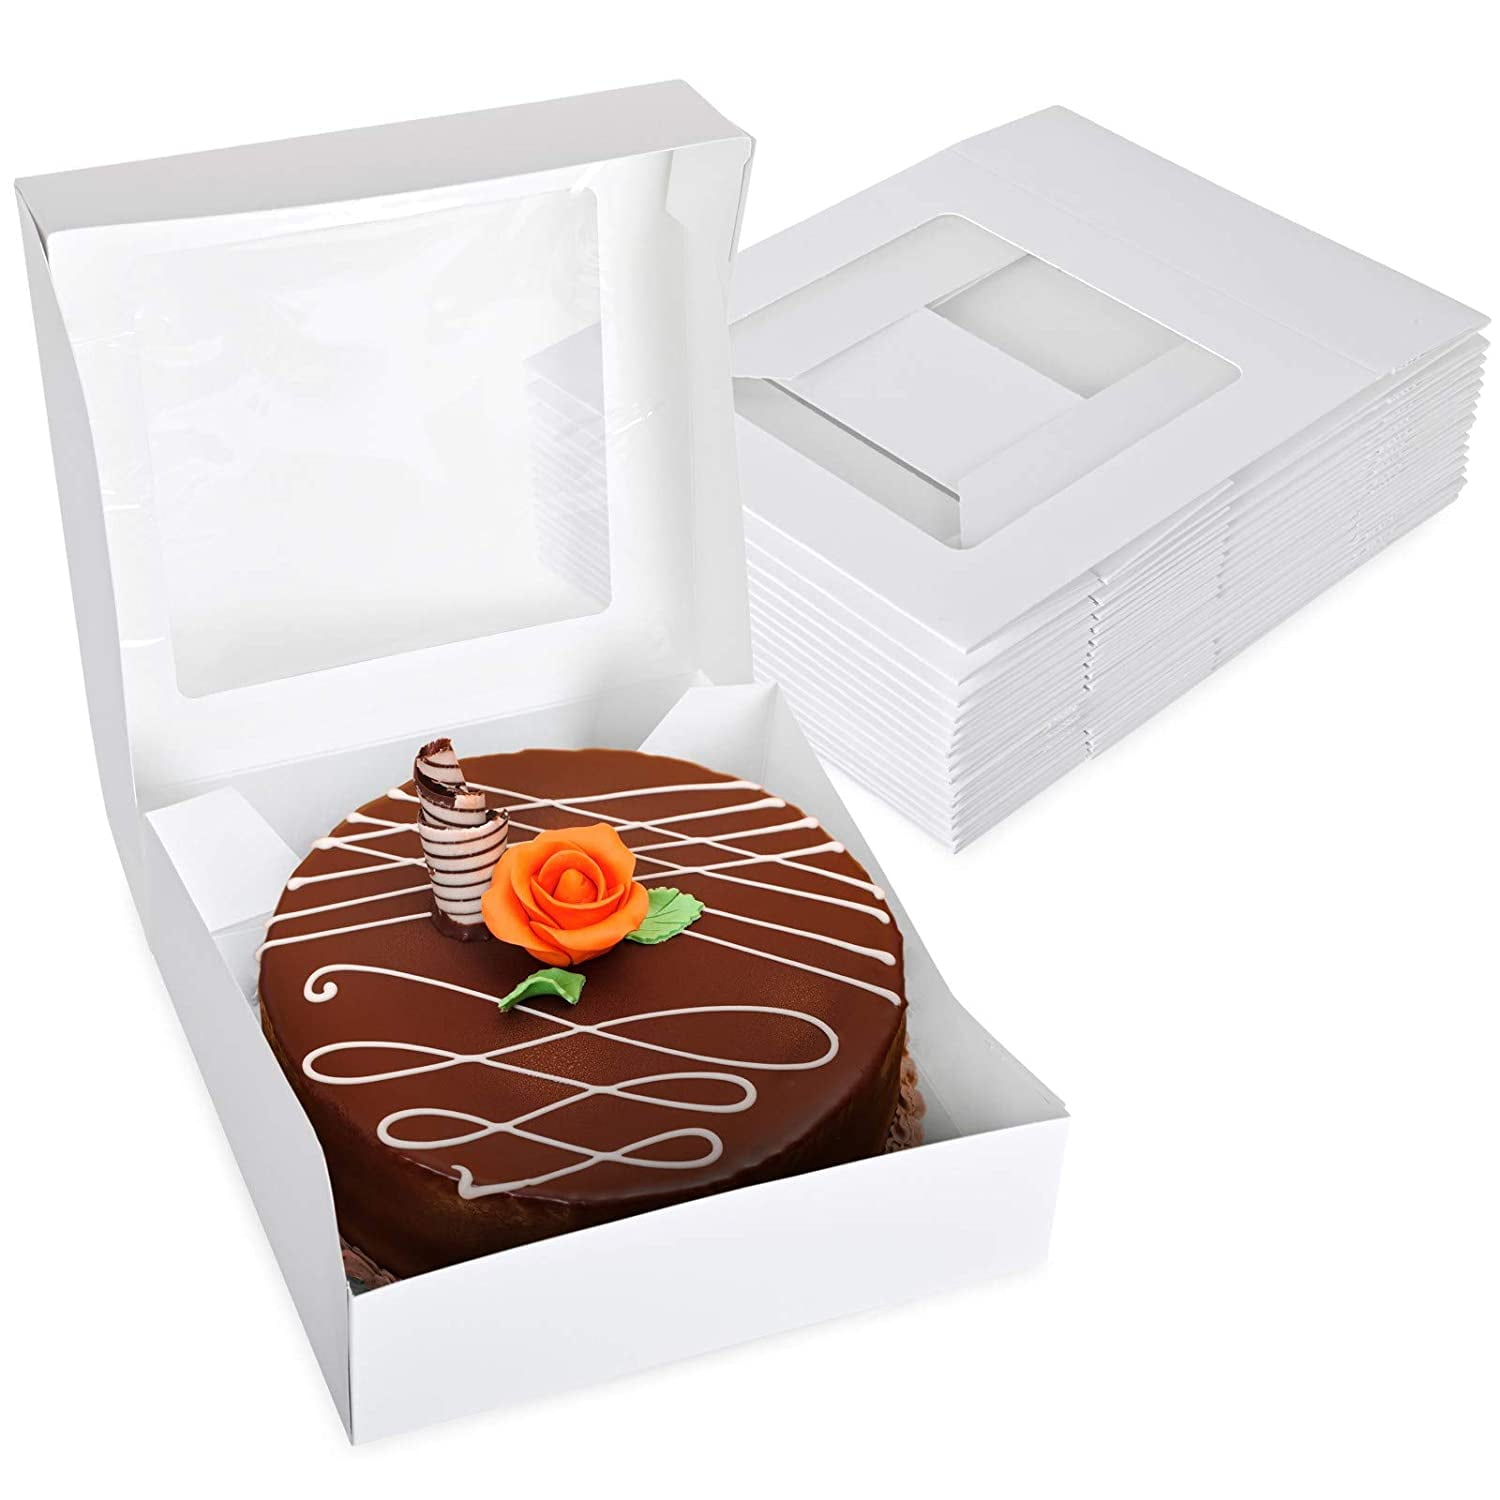 Details about   10 Pack White Bakery Pastry Boxes 10 x 10 x 4 Inch for Baked Goods Cakes & Gifts 